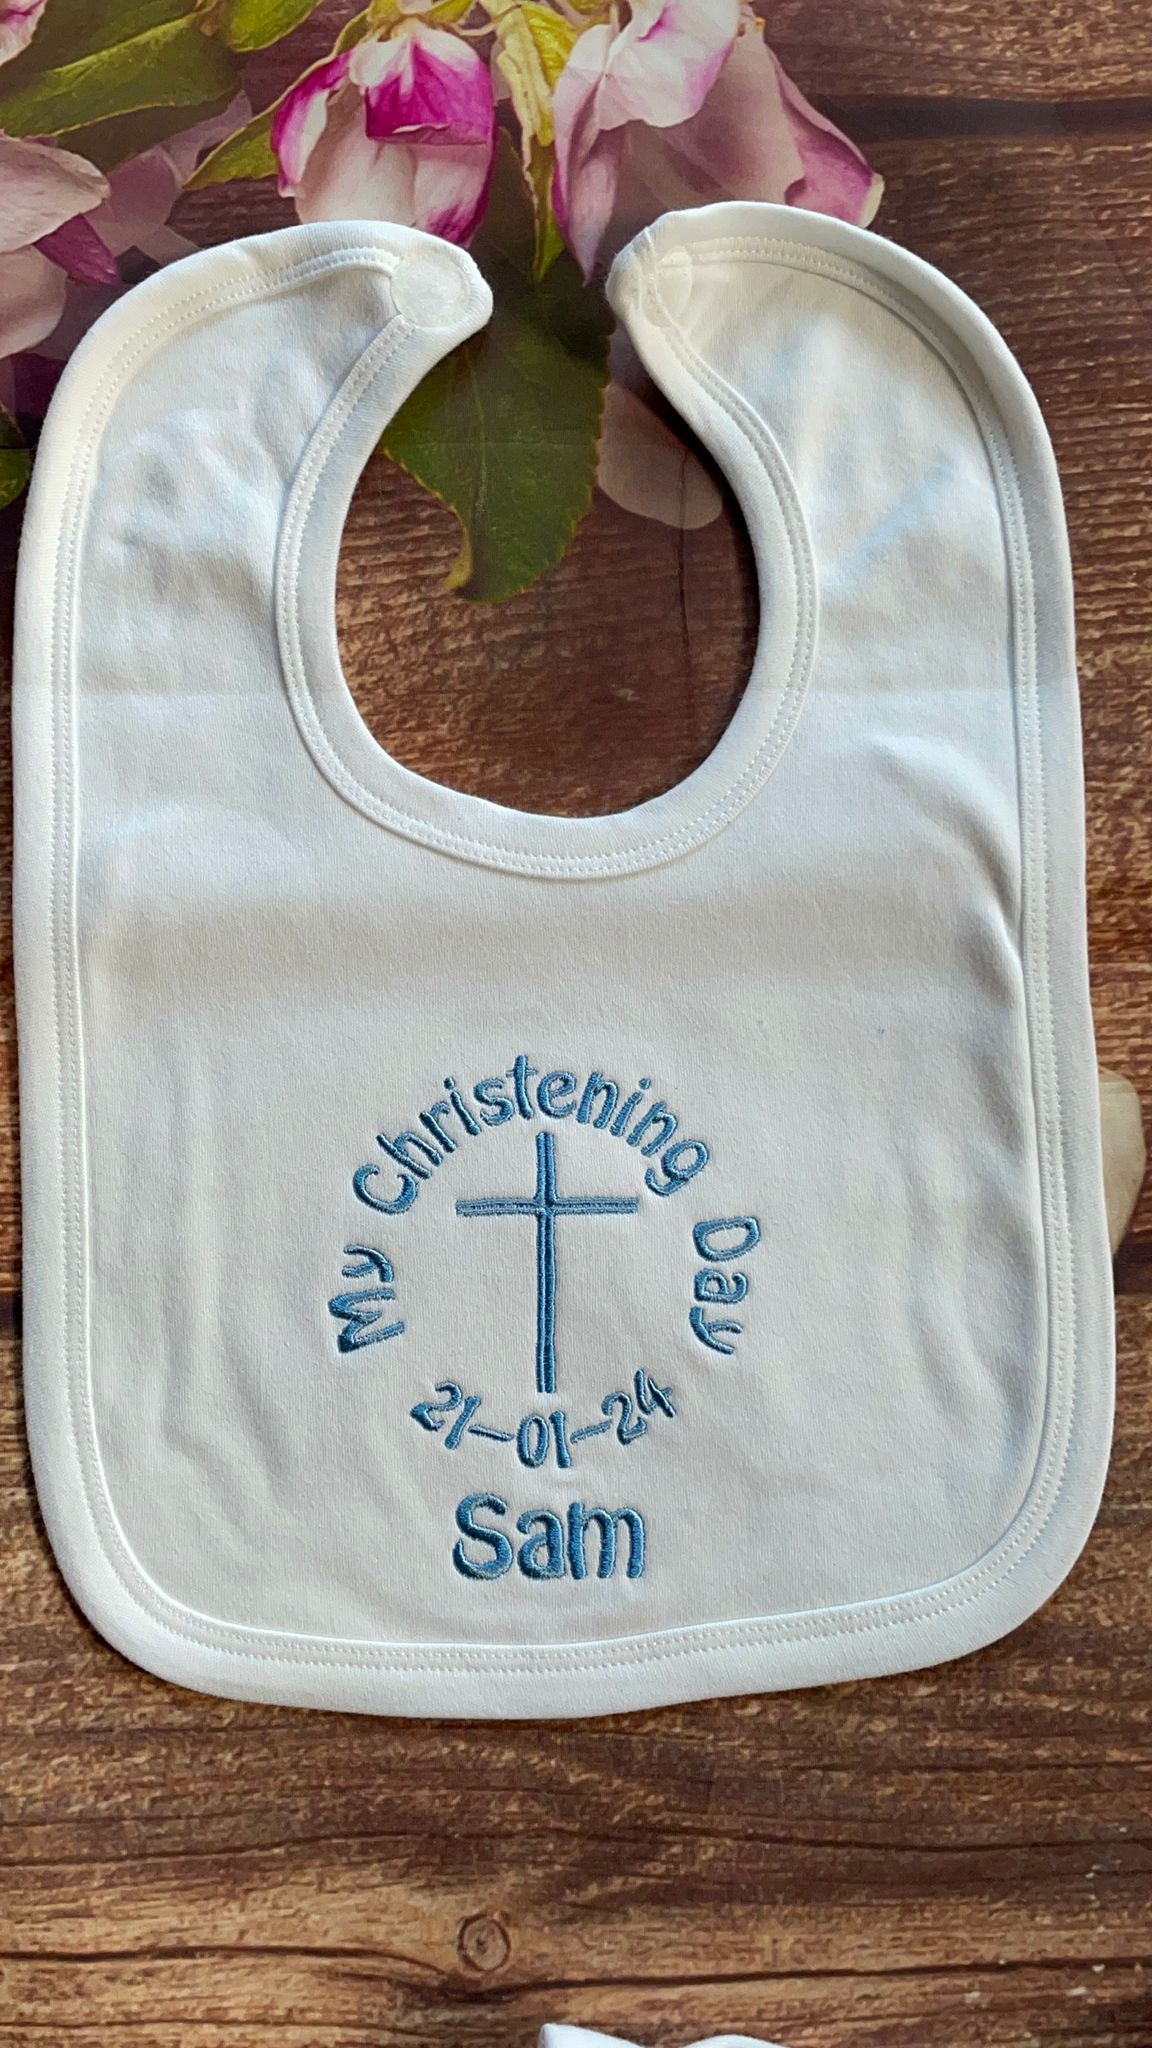 Christening / Baptism outfit